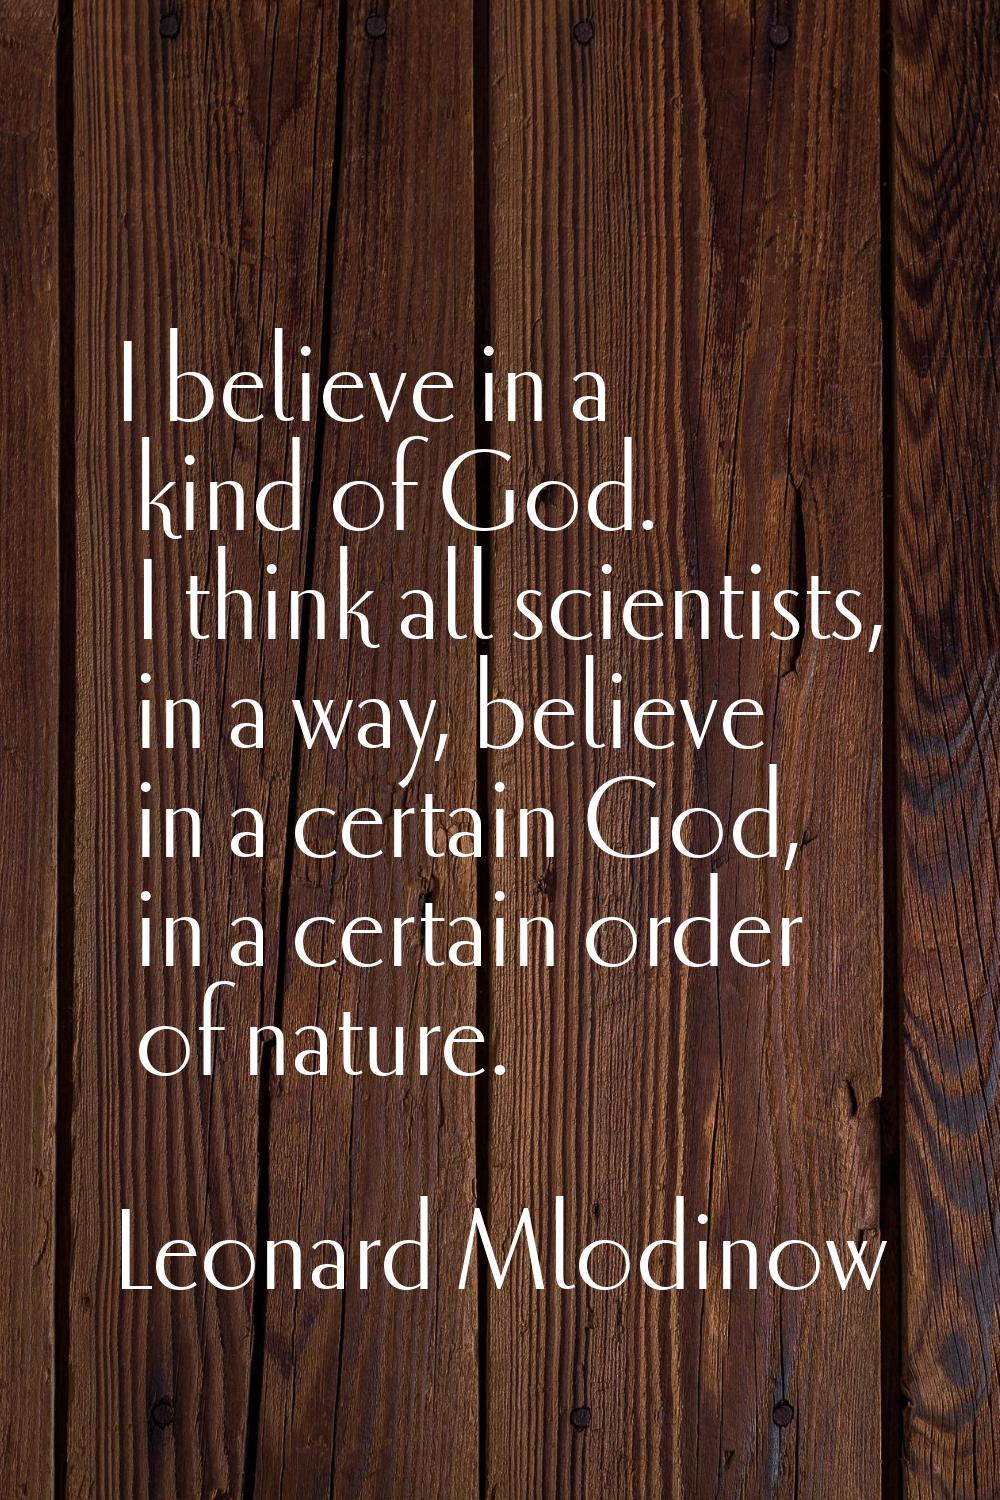 I believe in a kind of God. I think all scientists, in a way, believe in a certain God, in a certai